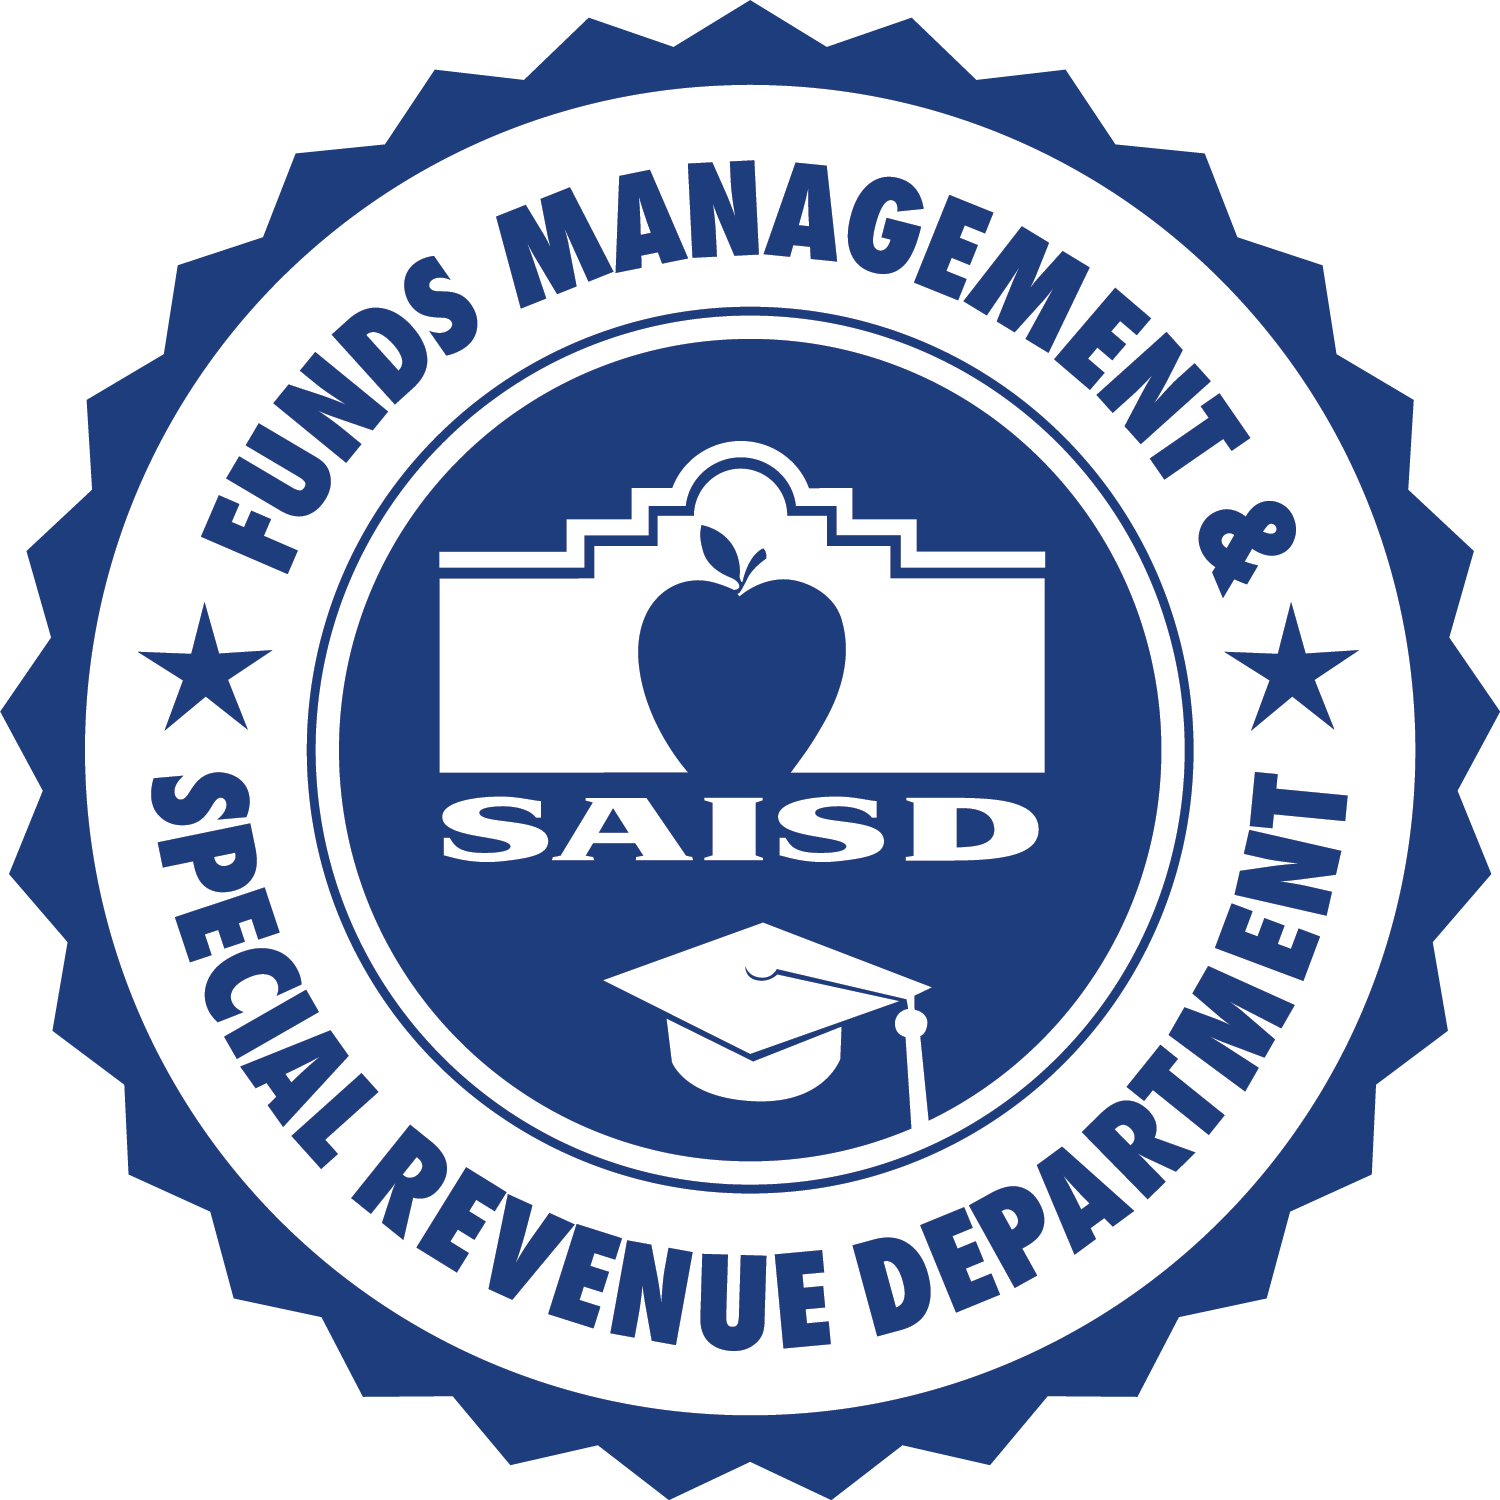 Funds Management Seal